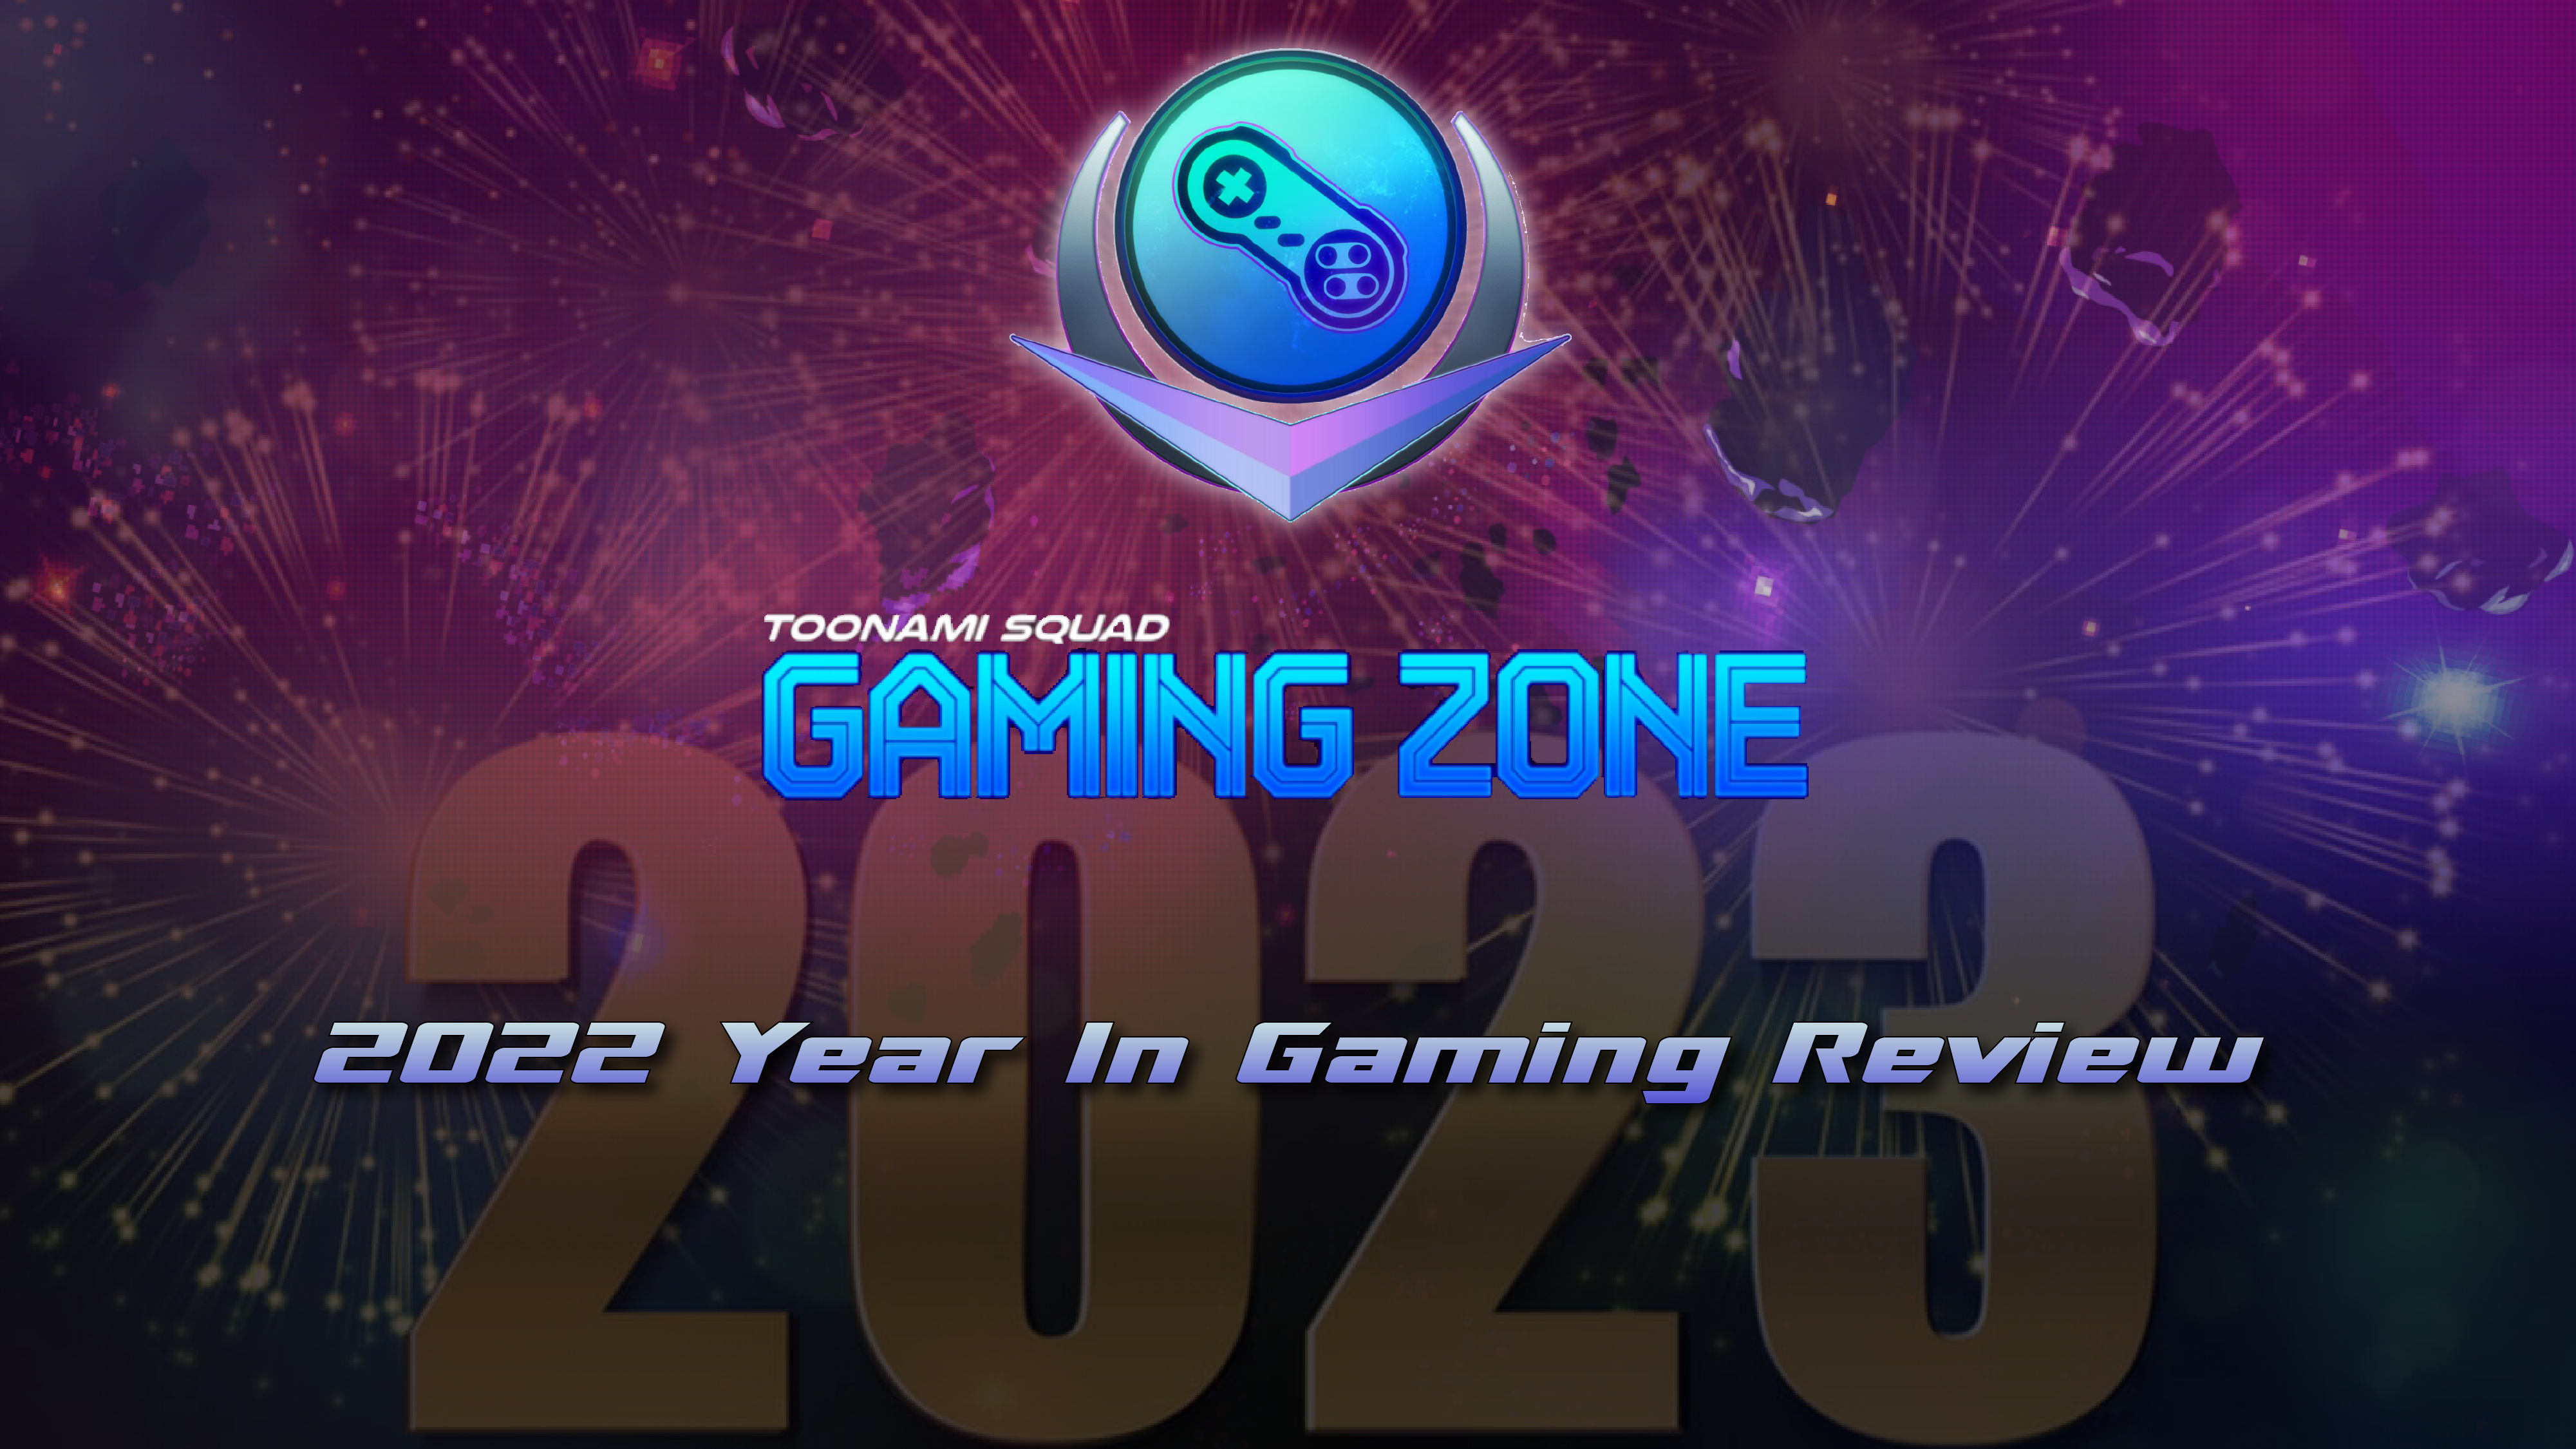 Toonami Squad Gaming Zone 2022 Year in Review